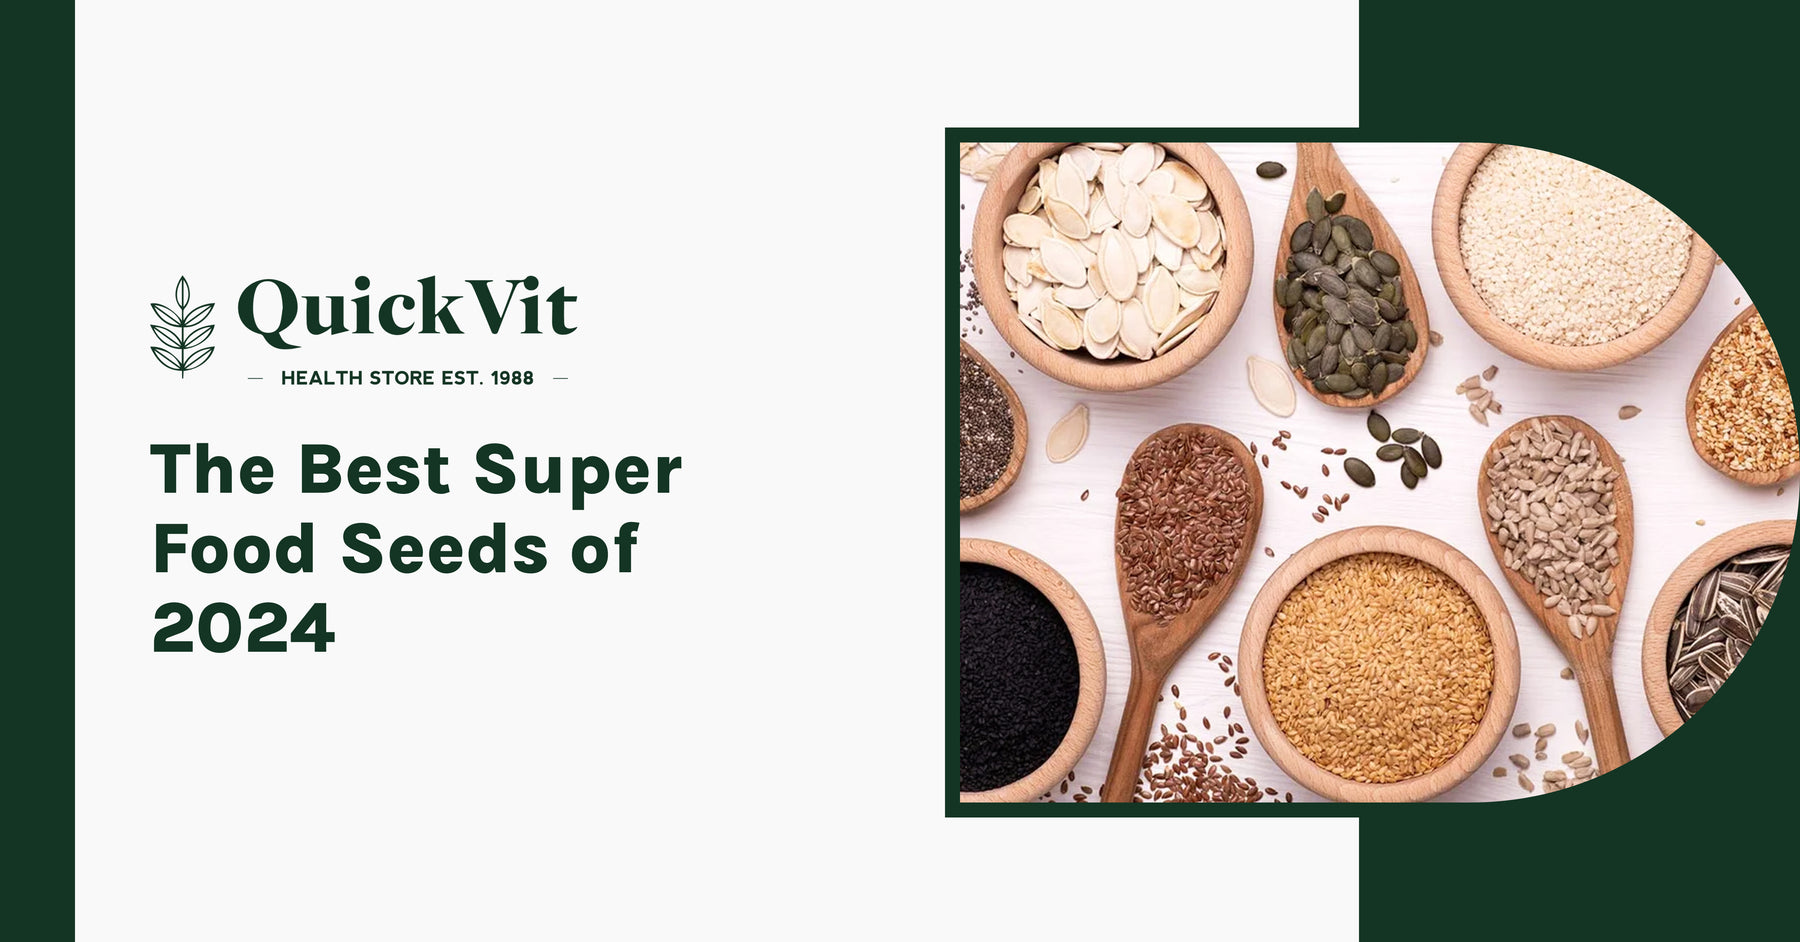 The Best Super Food Seeds of 2024